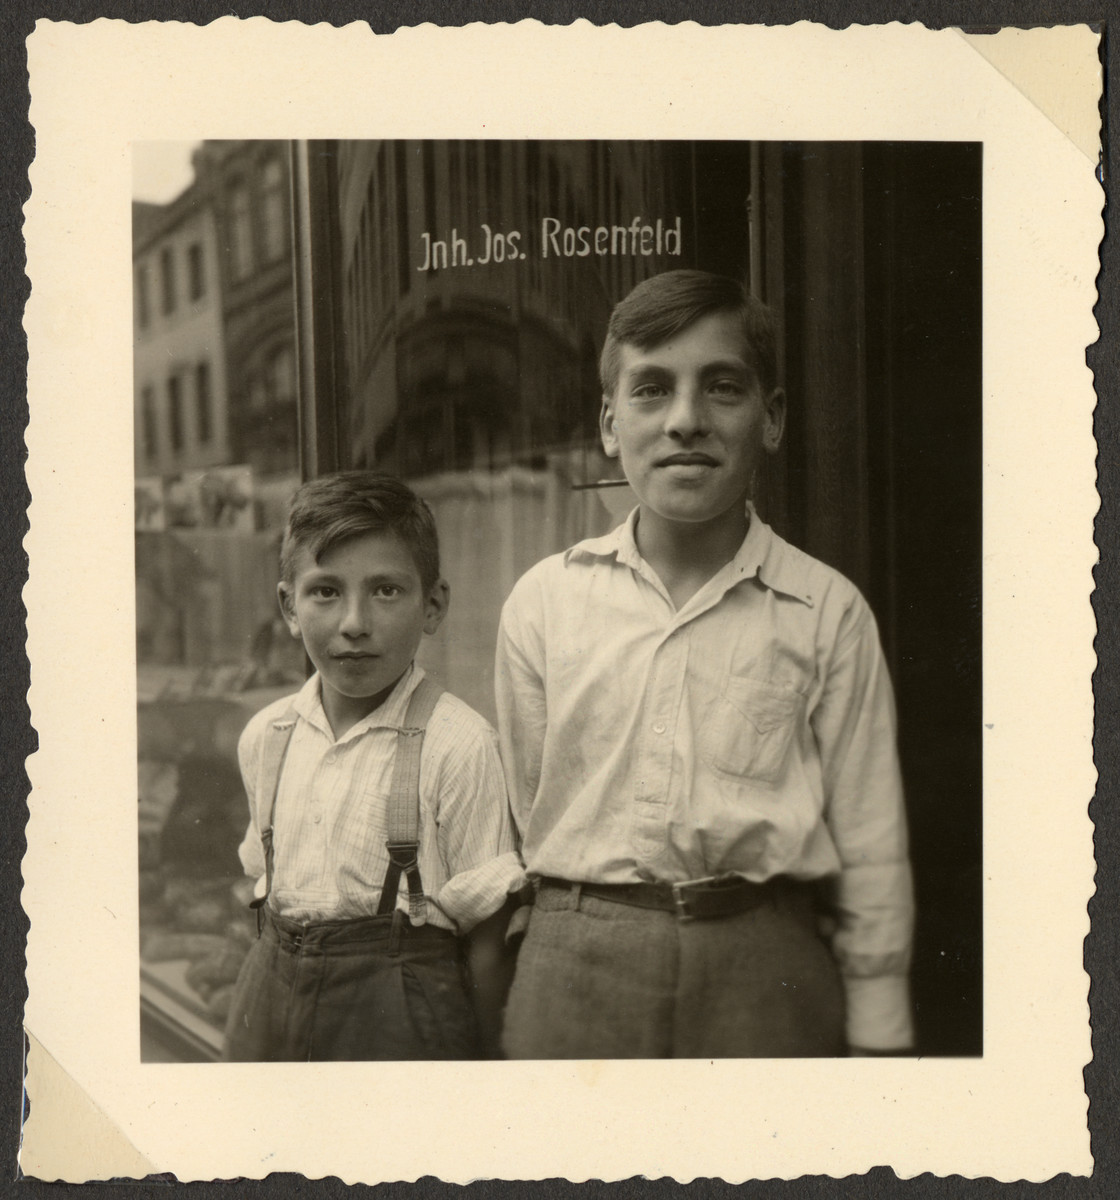 Close-up portrait of two German-Jewish brothers, Hermann (later Heinz) and Willi Rosenfeld, standing in front of their father's bakery at Trier, Neustr. 78.

Hermann and Willi were cousins of the donor of the photograph, and the sons of Josef and Emma Rosenfeld (nee Frank, daughter of Wilhem Frank of Osann/Mosel). Emma died on December 14, 1931 and Josef married Marta Kalbermann (b. December 7, 1901).